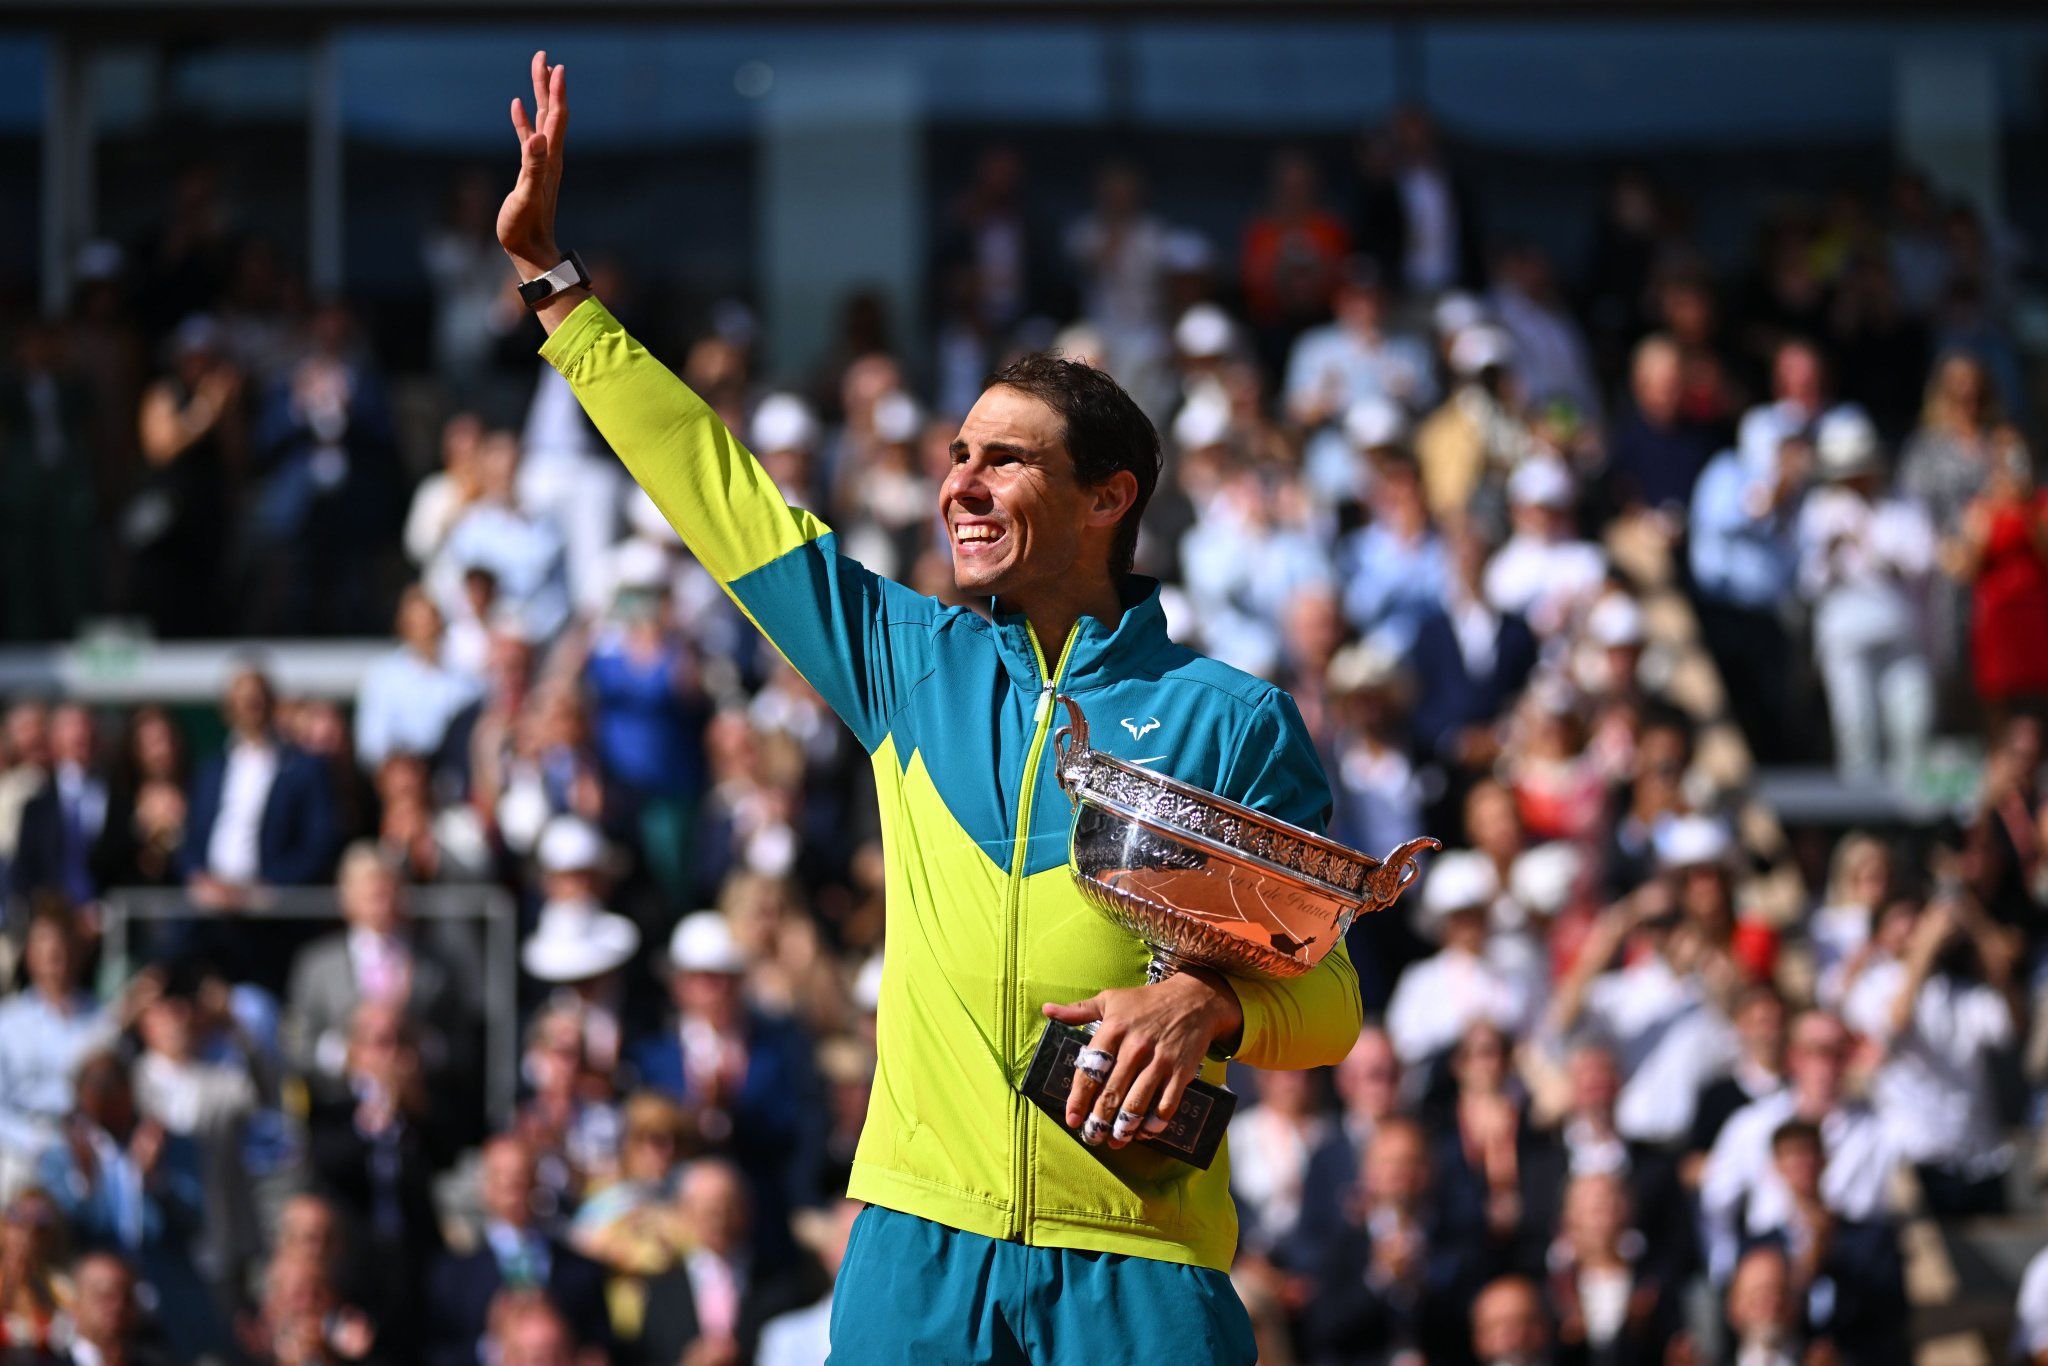 Rafael Nadal shatters multiple records at French Open 2022. Here’s a list